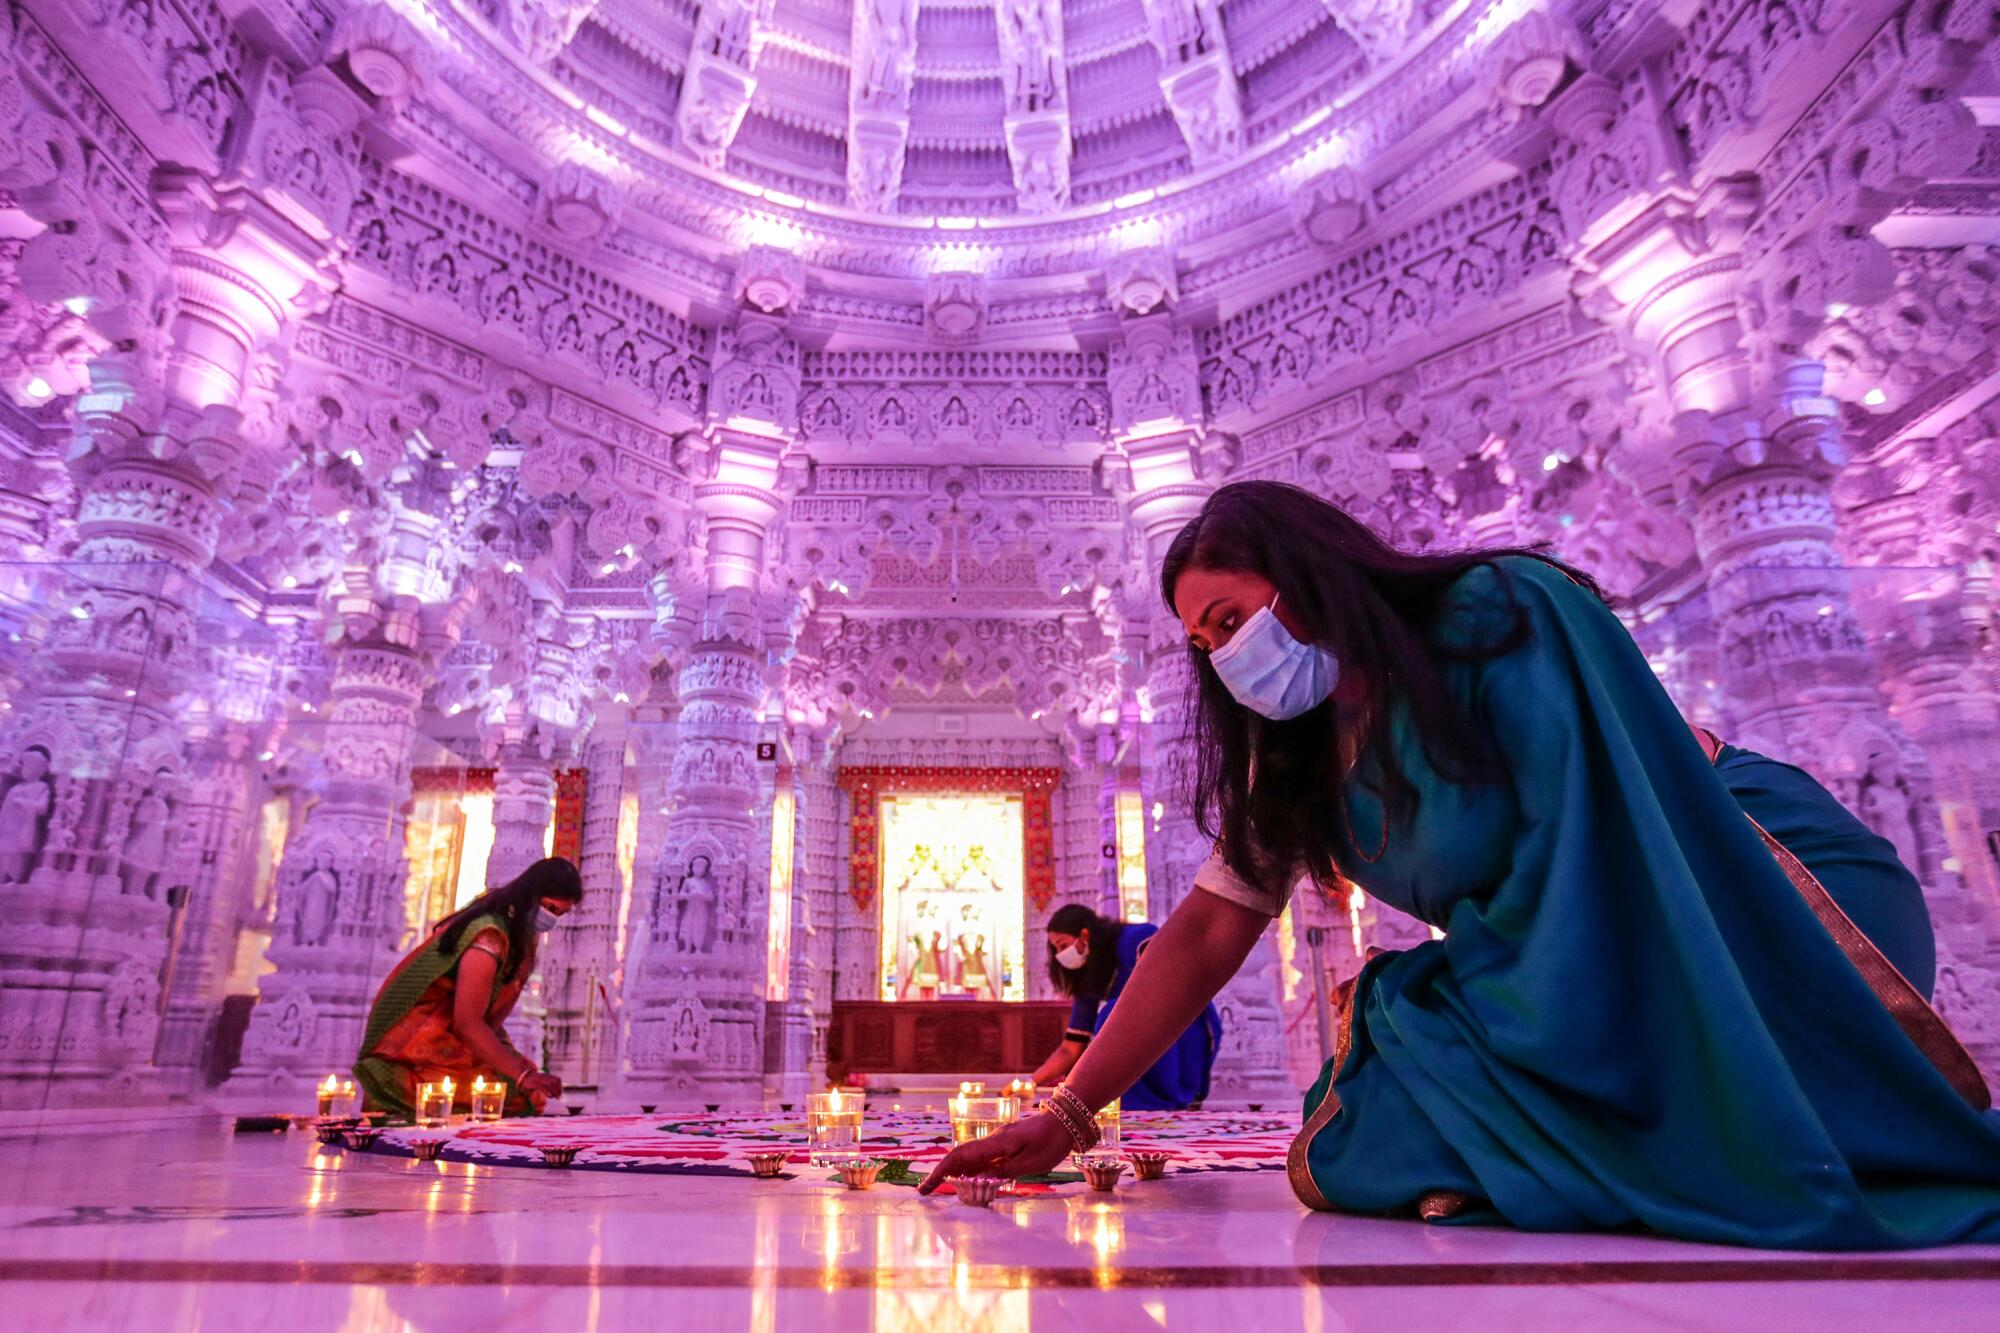 Women wearing masks and traditional robes kneel around a work of sand art inside an intricate Hindu temple